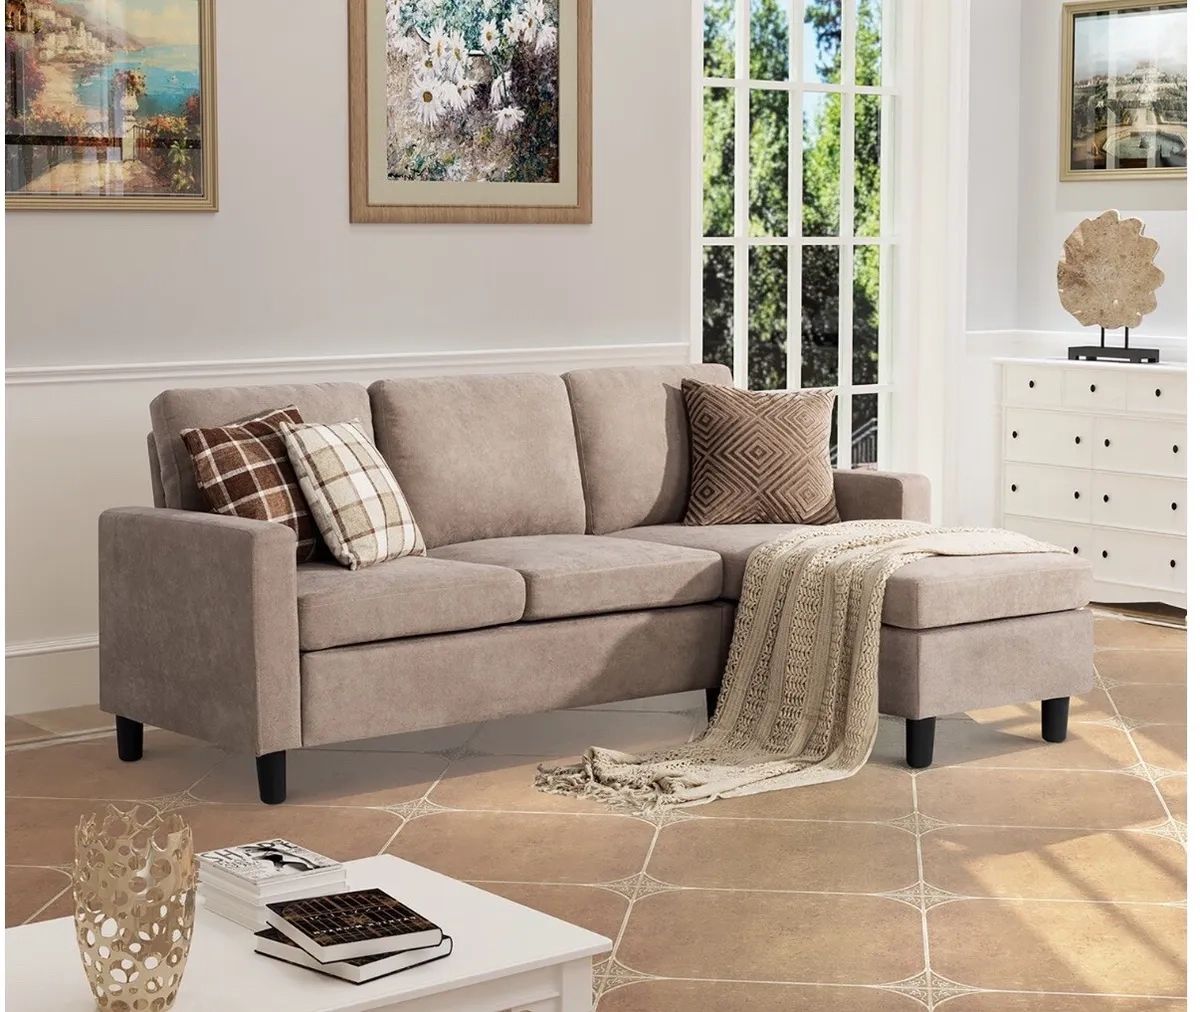 Modern L Shaped Section￼al Sofa With Linen Fabric(dark Beige) (khaki Color)  | Ebay For Sofas In Beige (View 9 of 15)